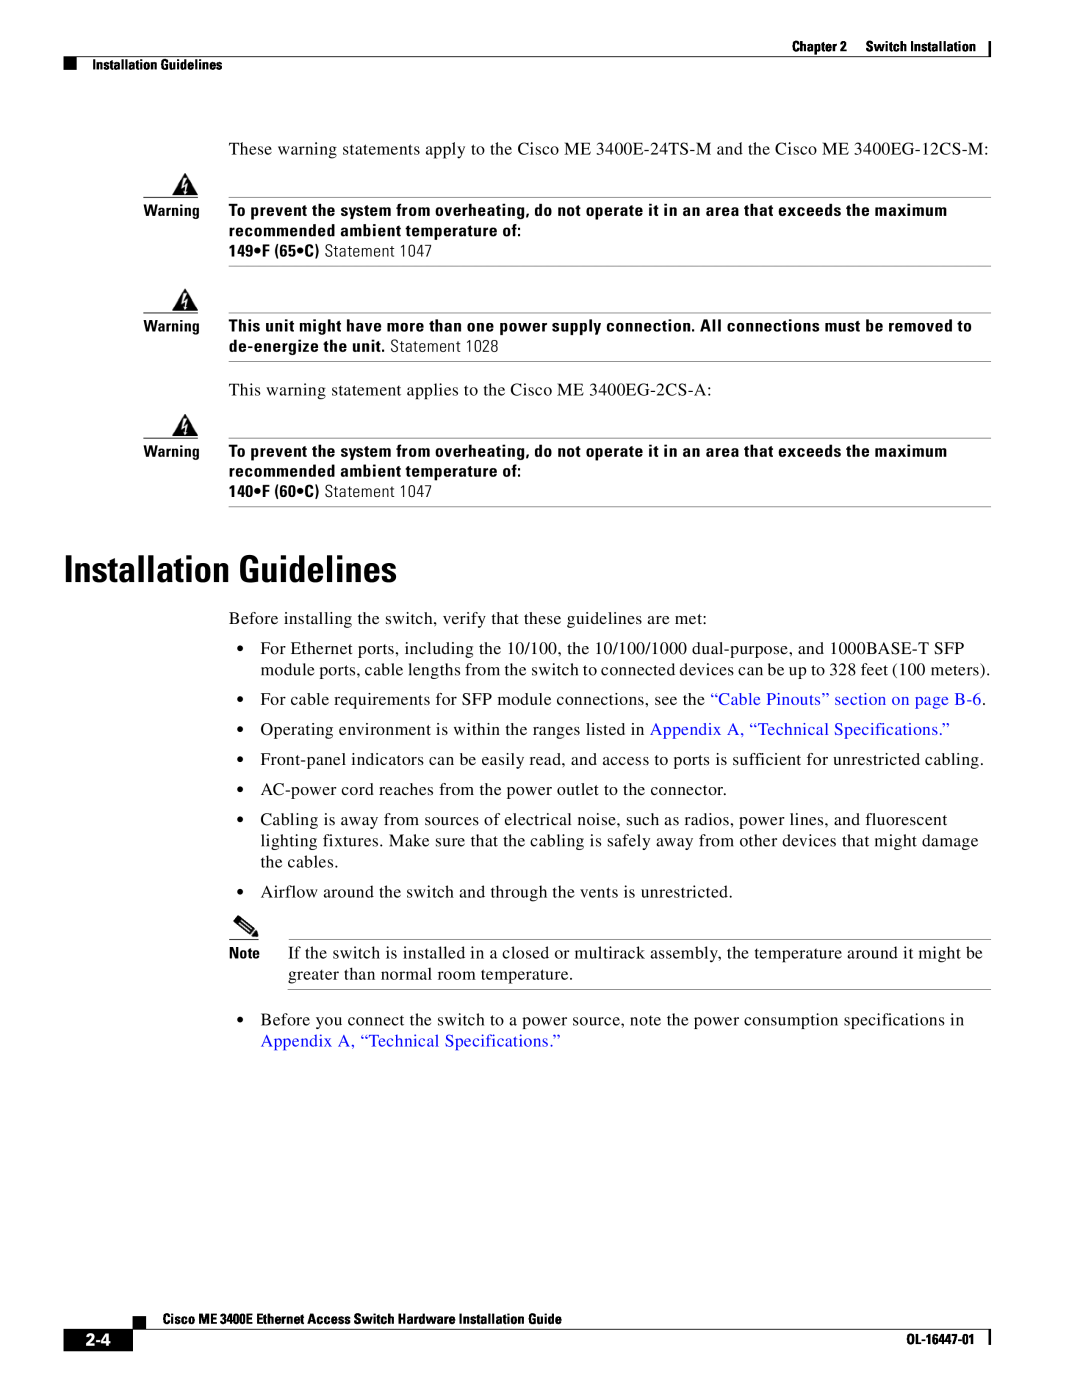 Cisco Systems OL-16447-01 manual Installation Guidelines, 149F 65C Statement, 140F 60C Statement 